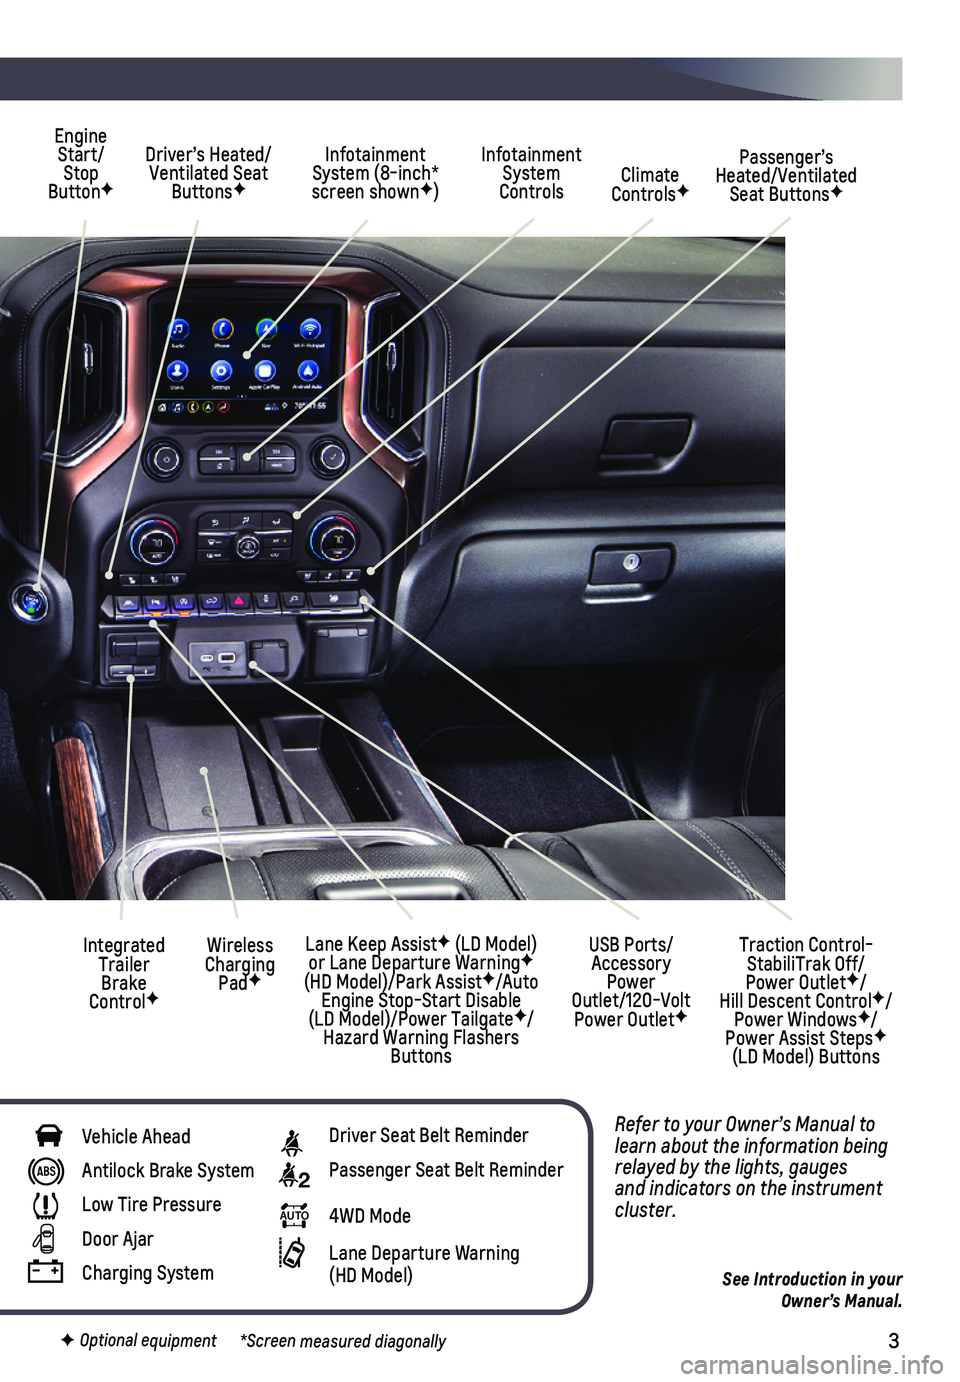 CHEVROLET SILVERADO 2020  Get To Know Guide 3
Refer to your Owner’s Manual to learn about the information being relayed by the lights, gauges and indicators on the instrument cluster.
See Introduction in your  Owner’s Manual.
Driver’s Hea